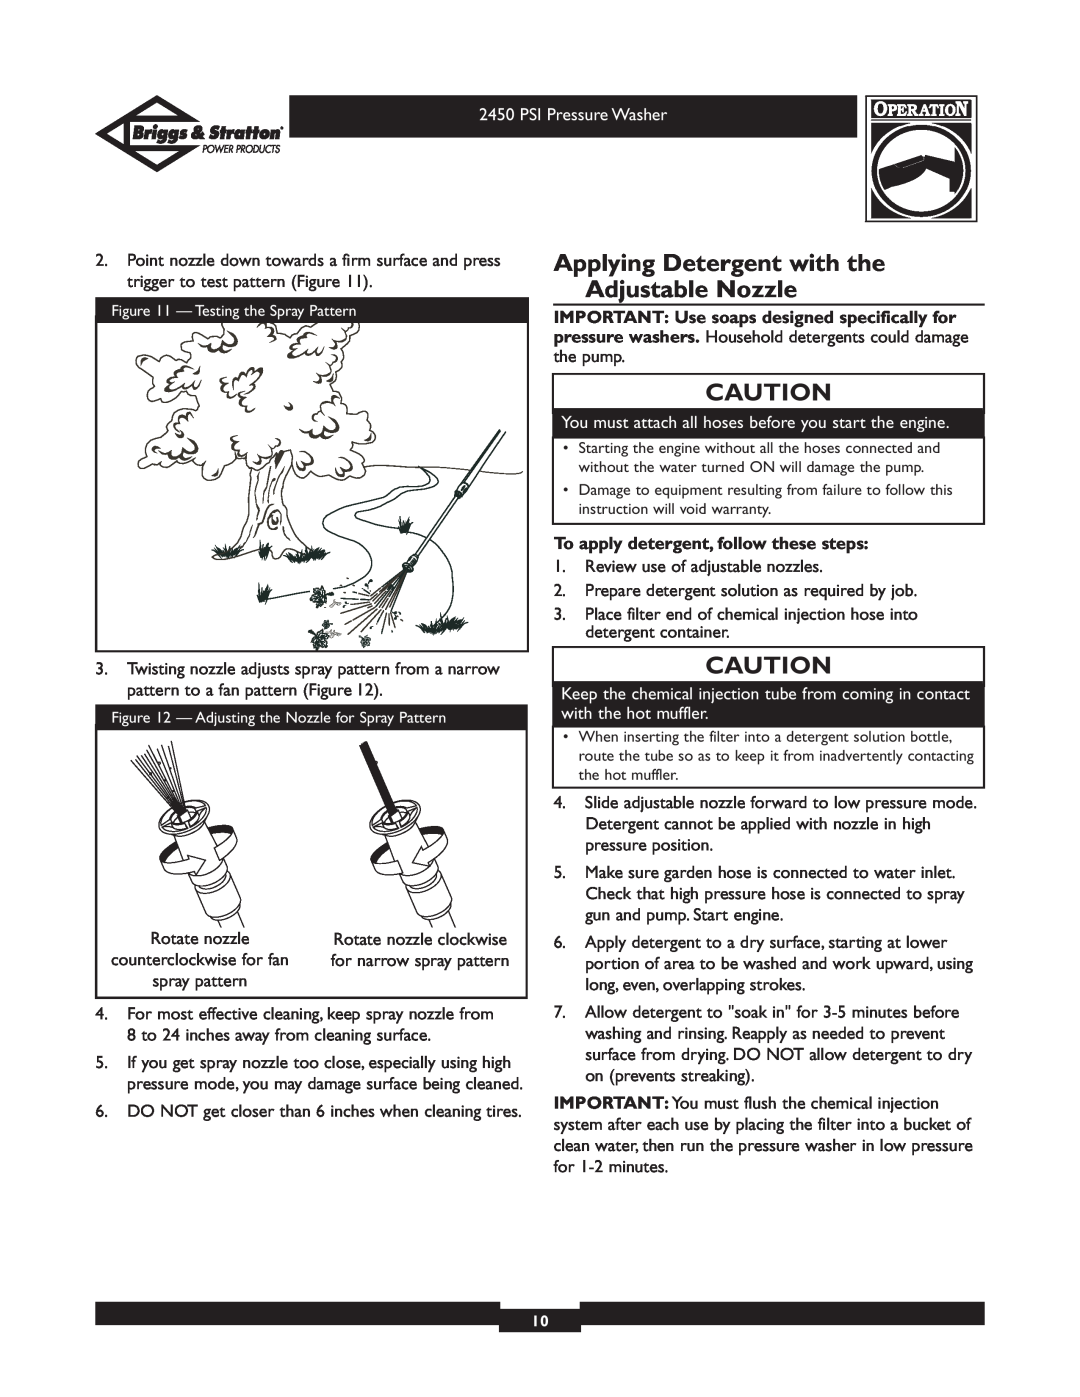 Briggs & Stratton 020219 owner manual Applying Detergent with the Adjustable Nozzle, To apply detergent, follow these steps 